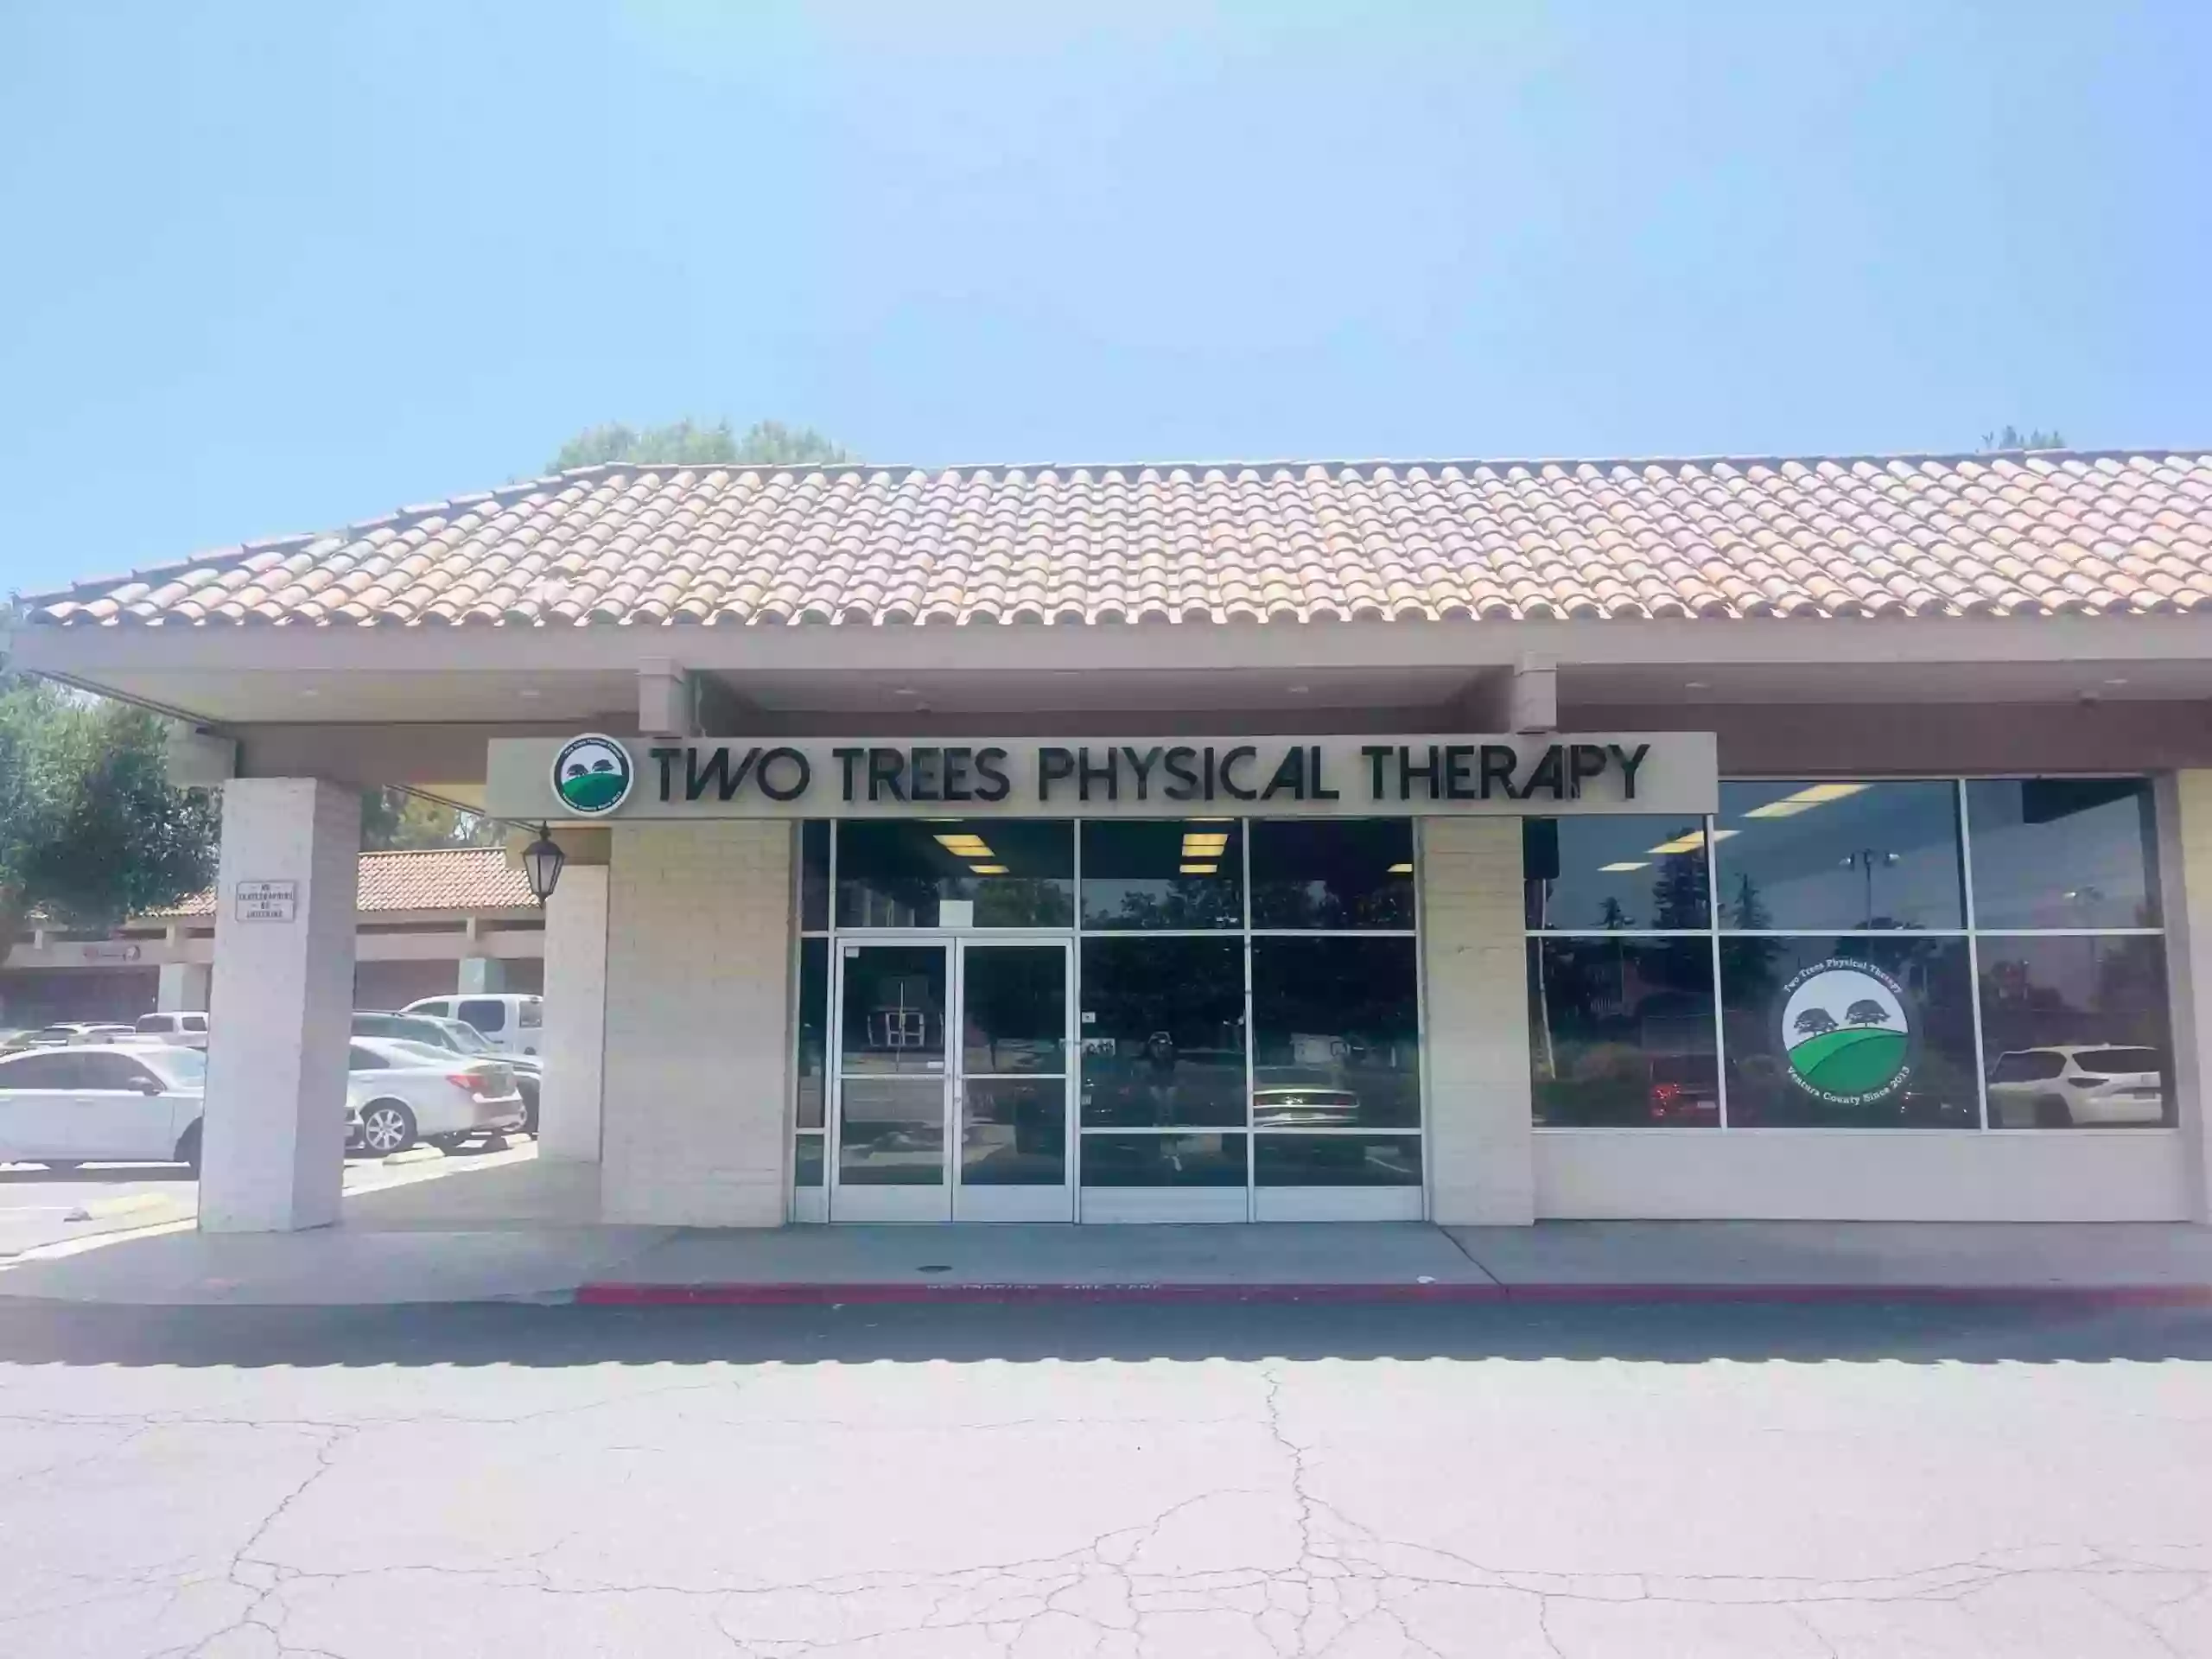 Two Trees Physical Therapy